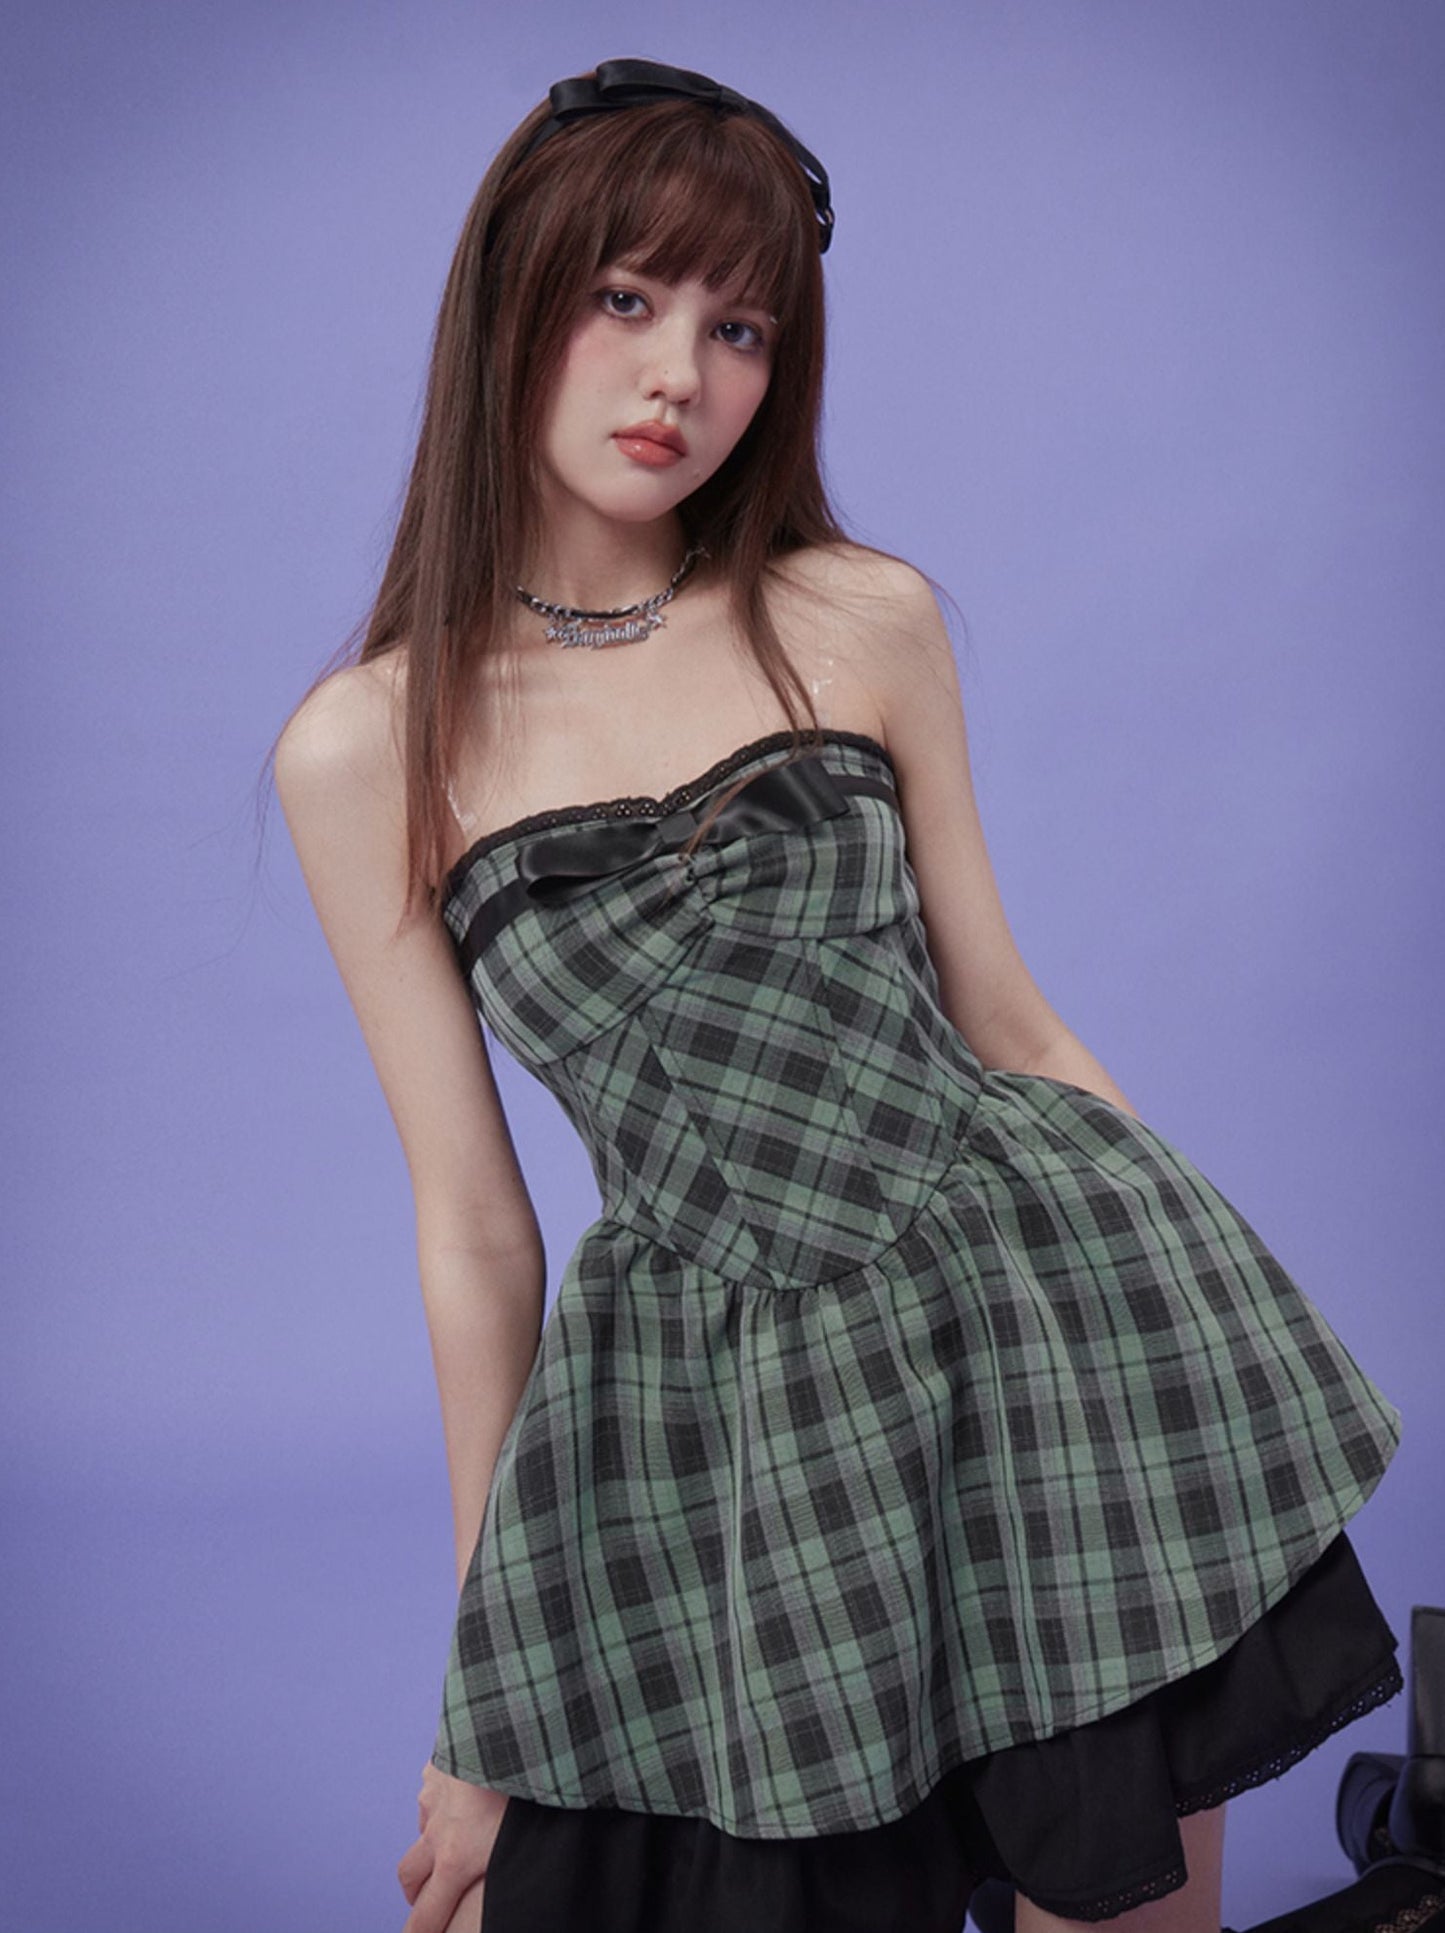 Wizard Green Check Bow Tube Top Dress